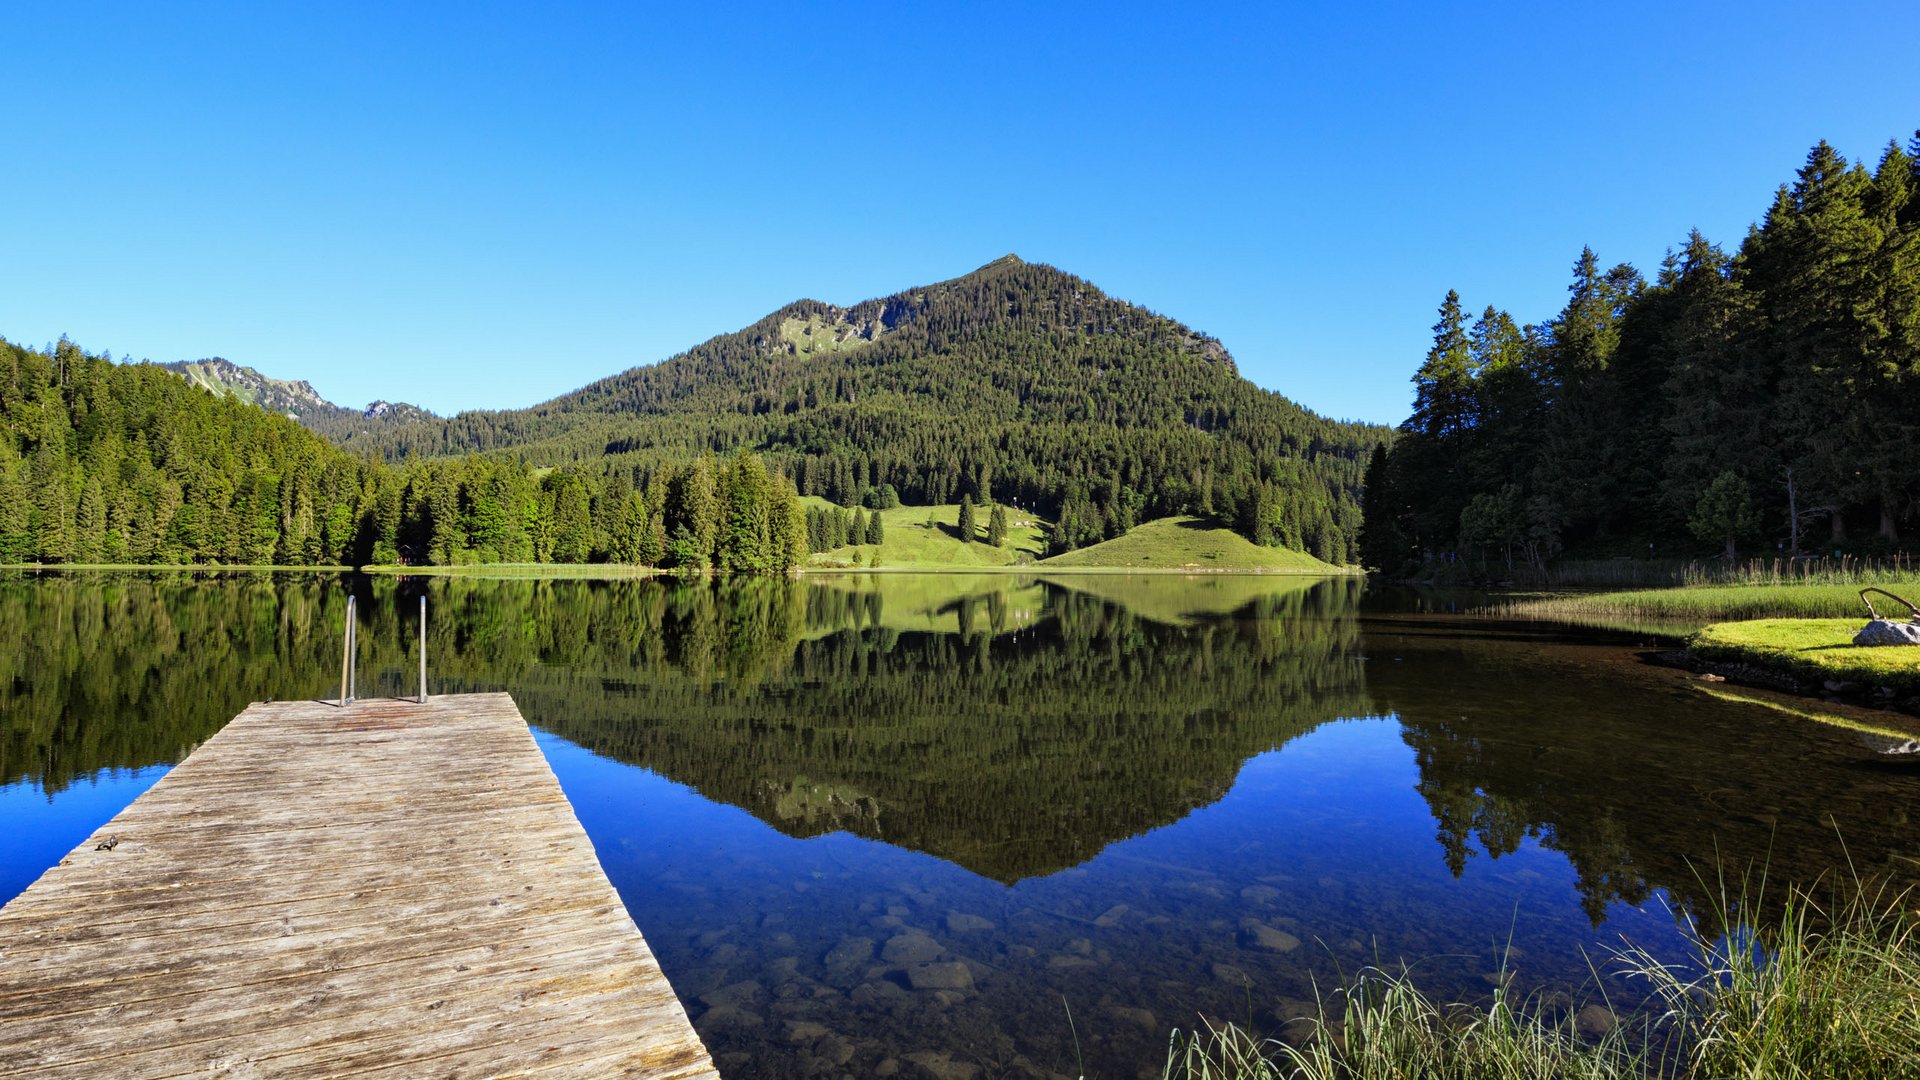 An authentic holiday at Lake Spitzingsee